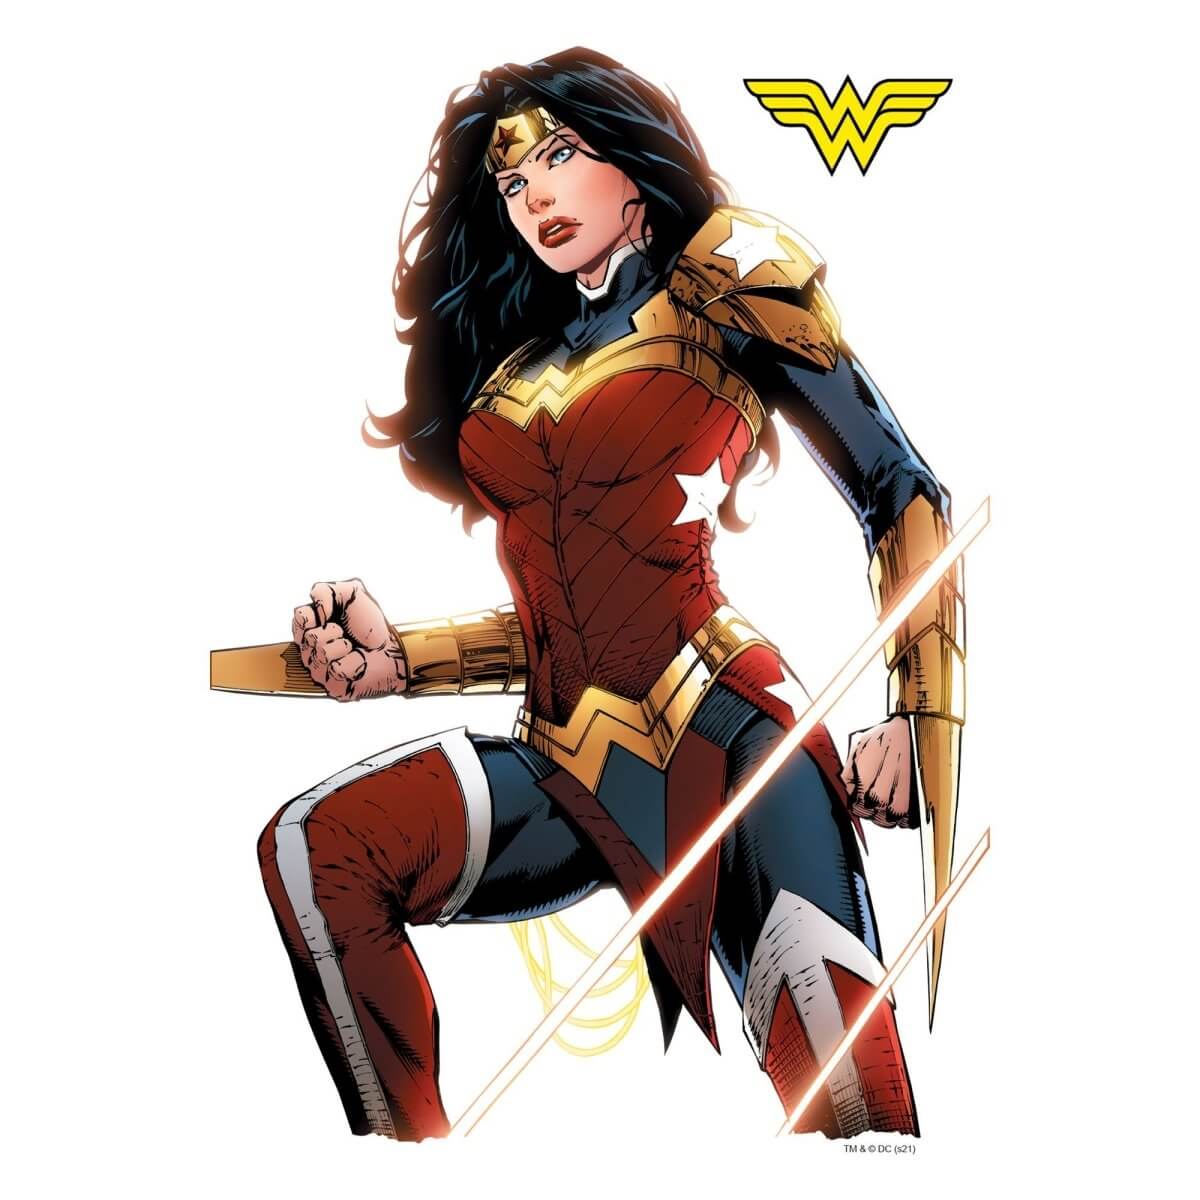 Kismet Decals Wonder Woman #41 Comic Cover Series Officially Licensed Wall Sticker - Easy DIY DC Comics Home, Kids or Adult Bedroom, Office, Living Room Decor Wall Art - Kismet Decals